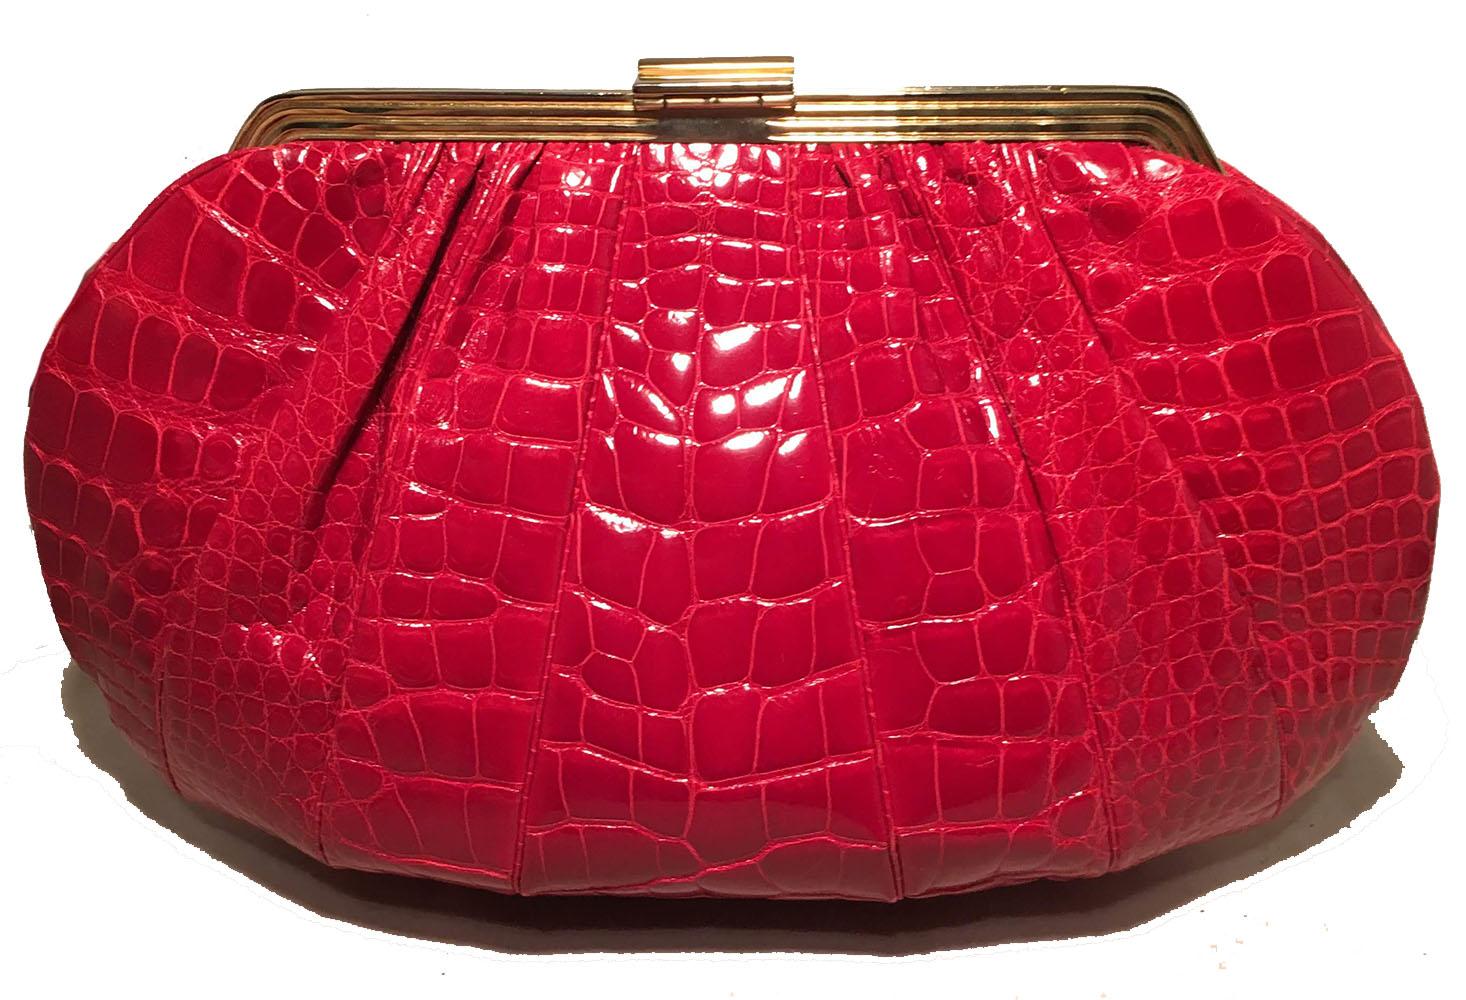 GORGEOUS Judith Leiber Vintage Red Alligator XL Oversized Clutch in excellent condition. Bright red alligator exterior trimmed with gold hardware and top dark red resin roman cameo detail. Top lifting latch closure opens to a red leather lined